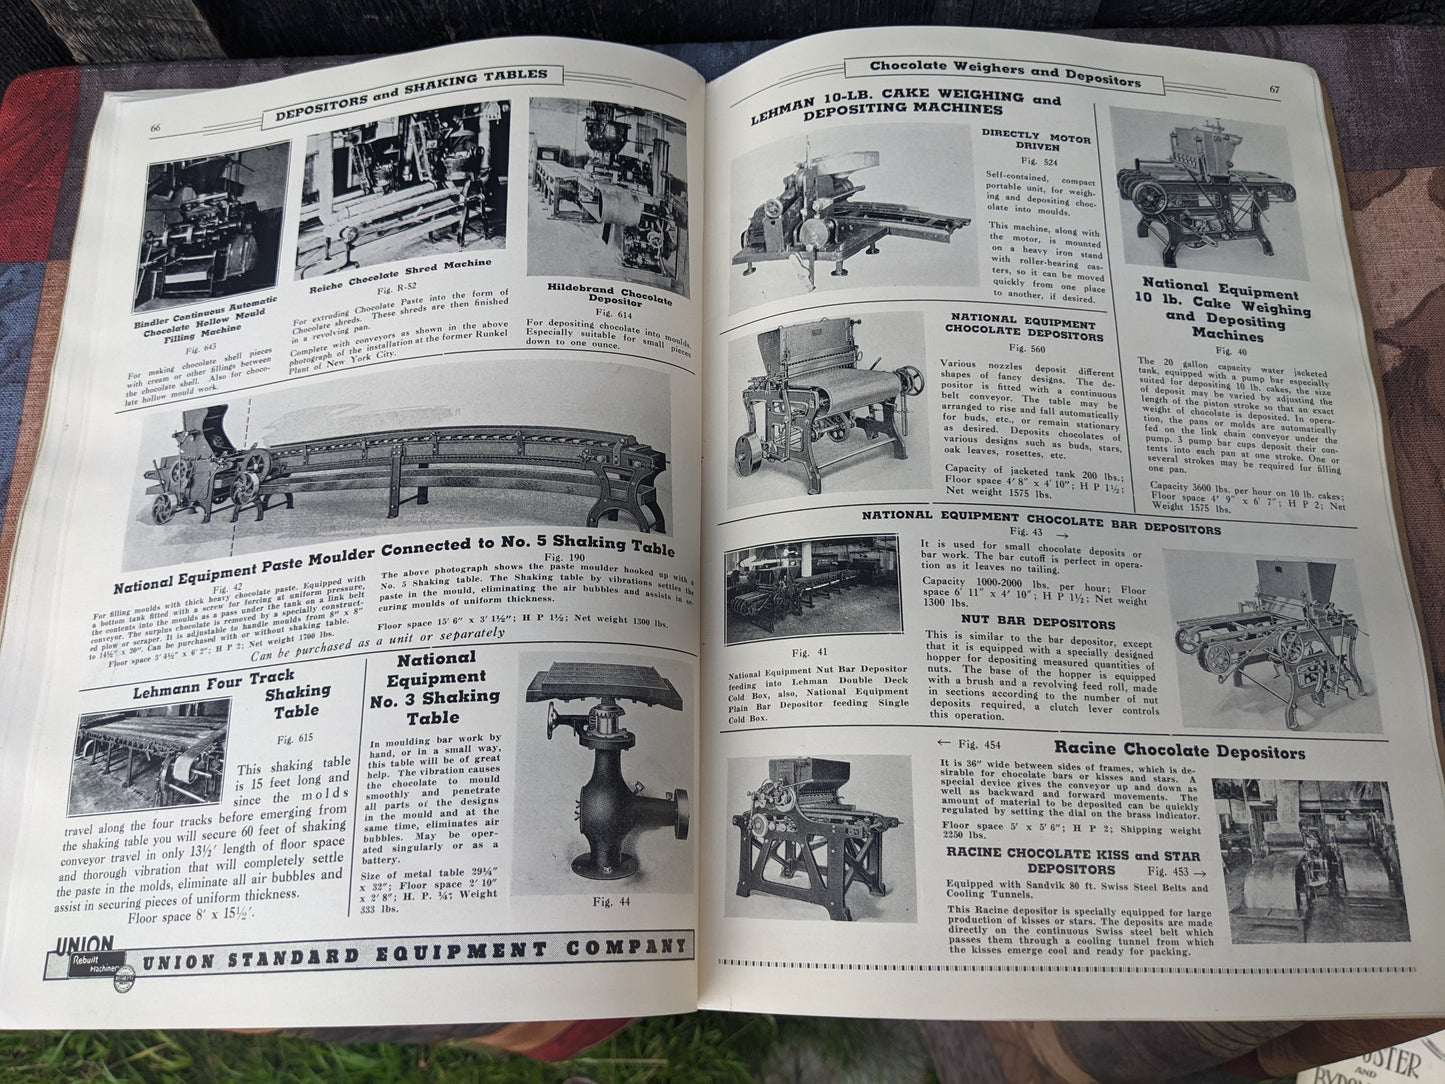 Vintage 1940 Union Standard  Equipment Catalog for the Confectionery and Chocolate Industry